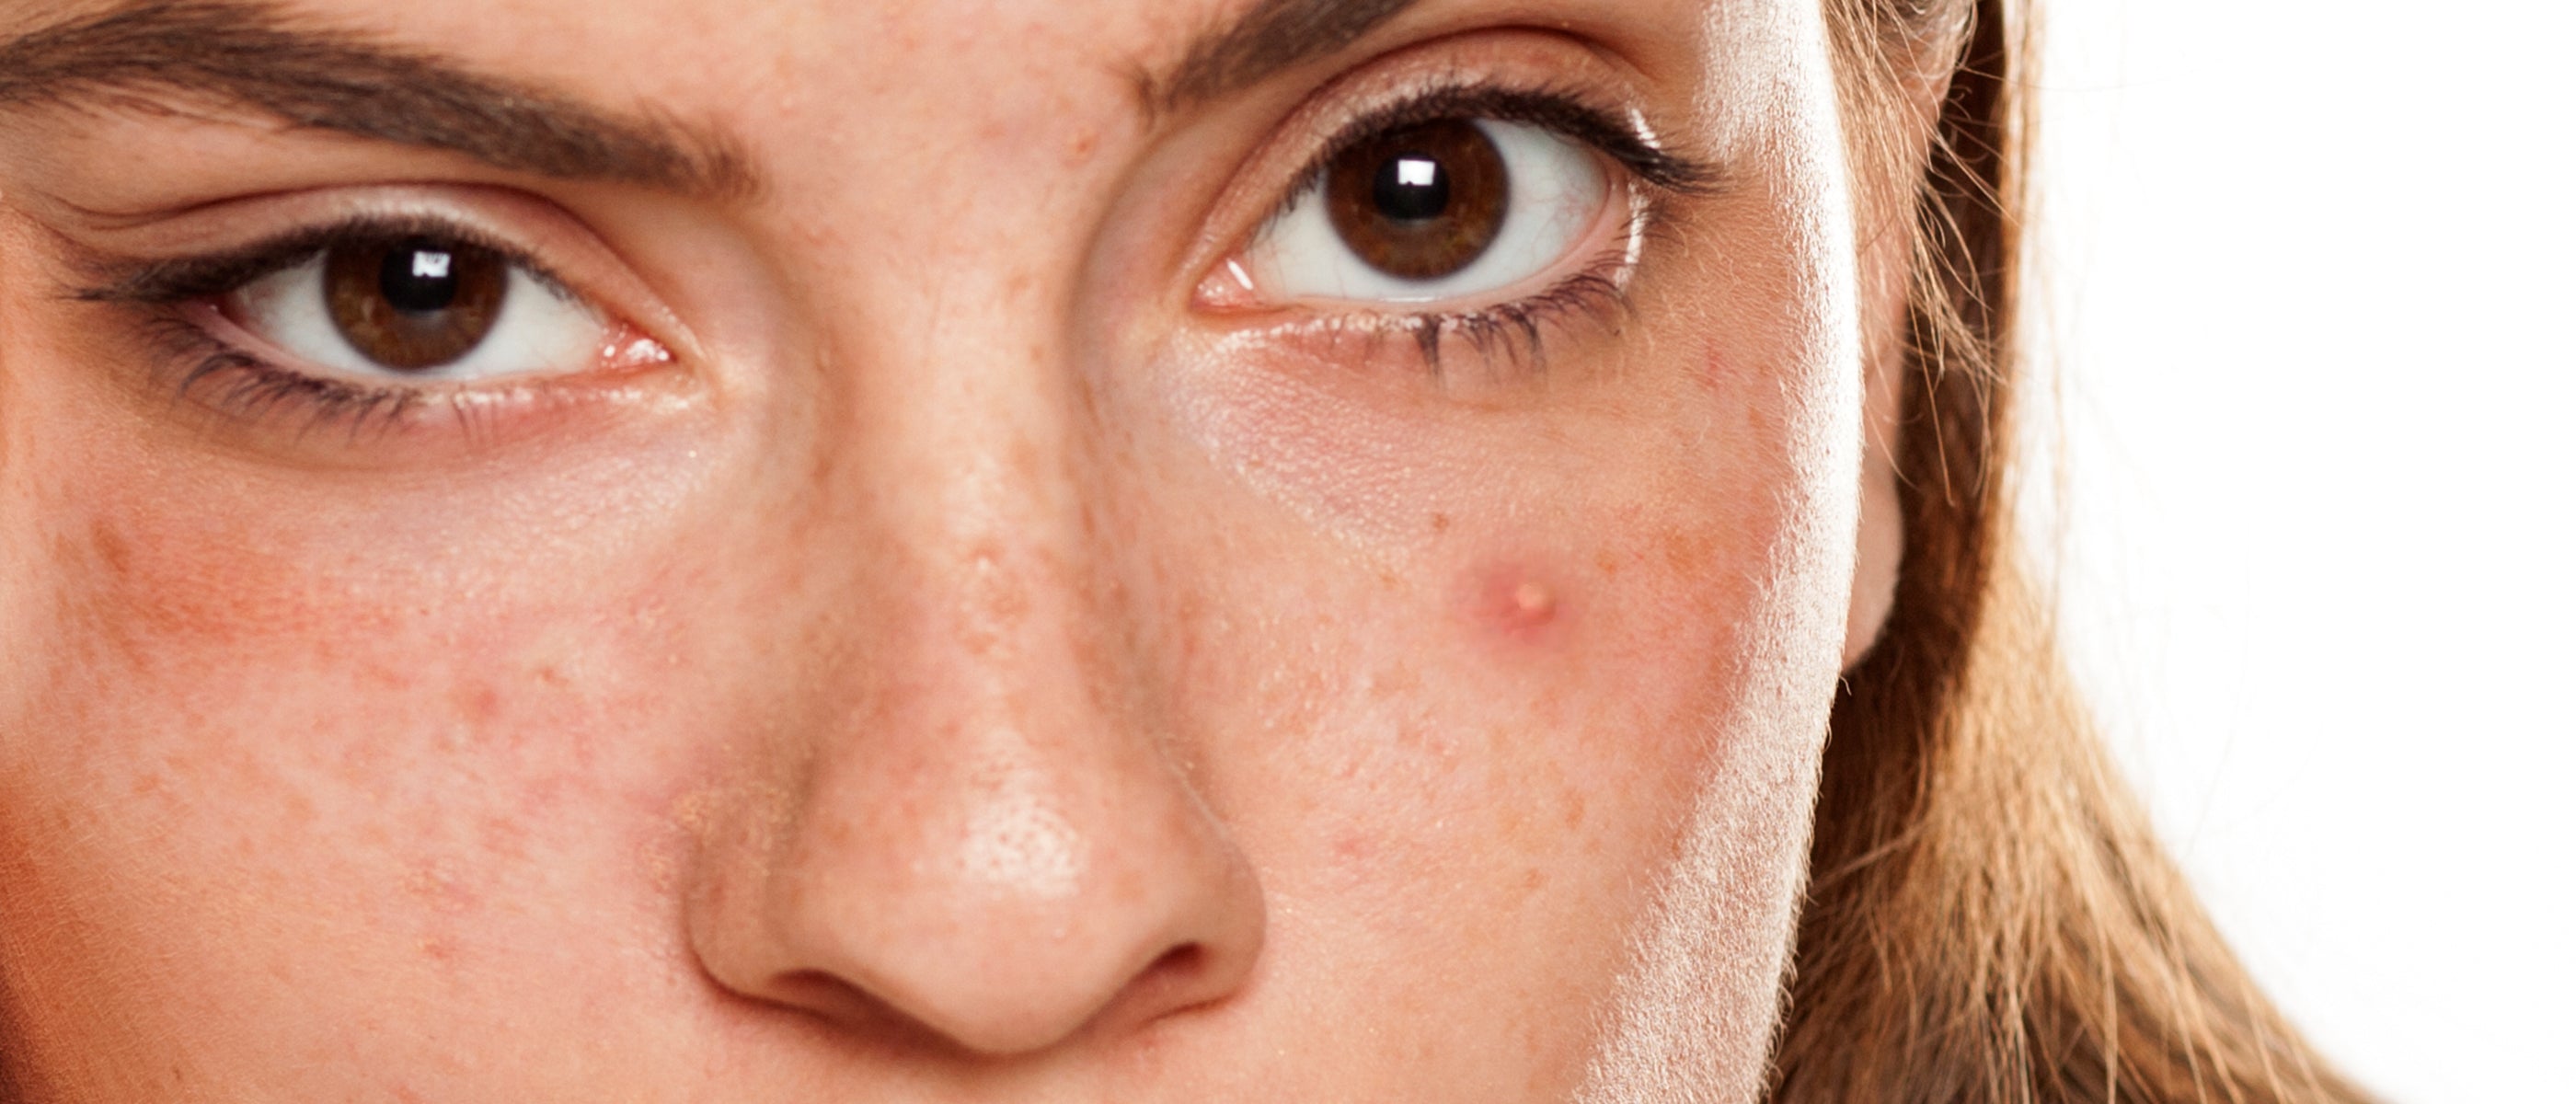 Close-up of woman face showing acne before using JOVS LED therapy patches.